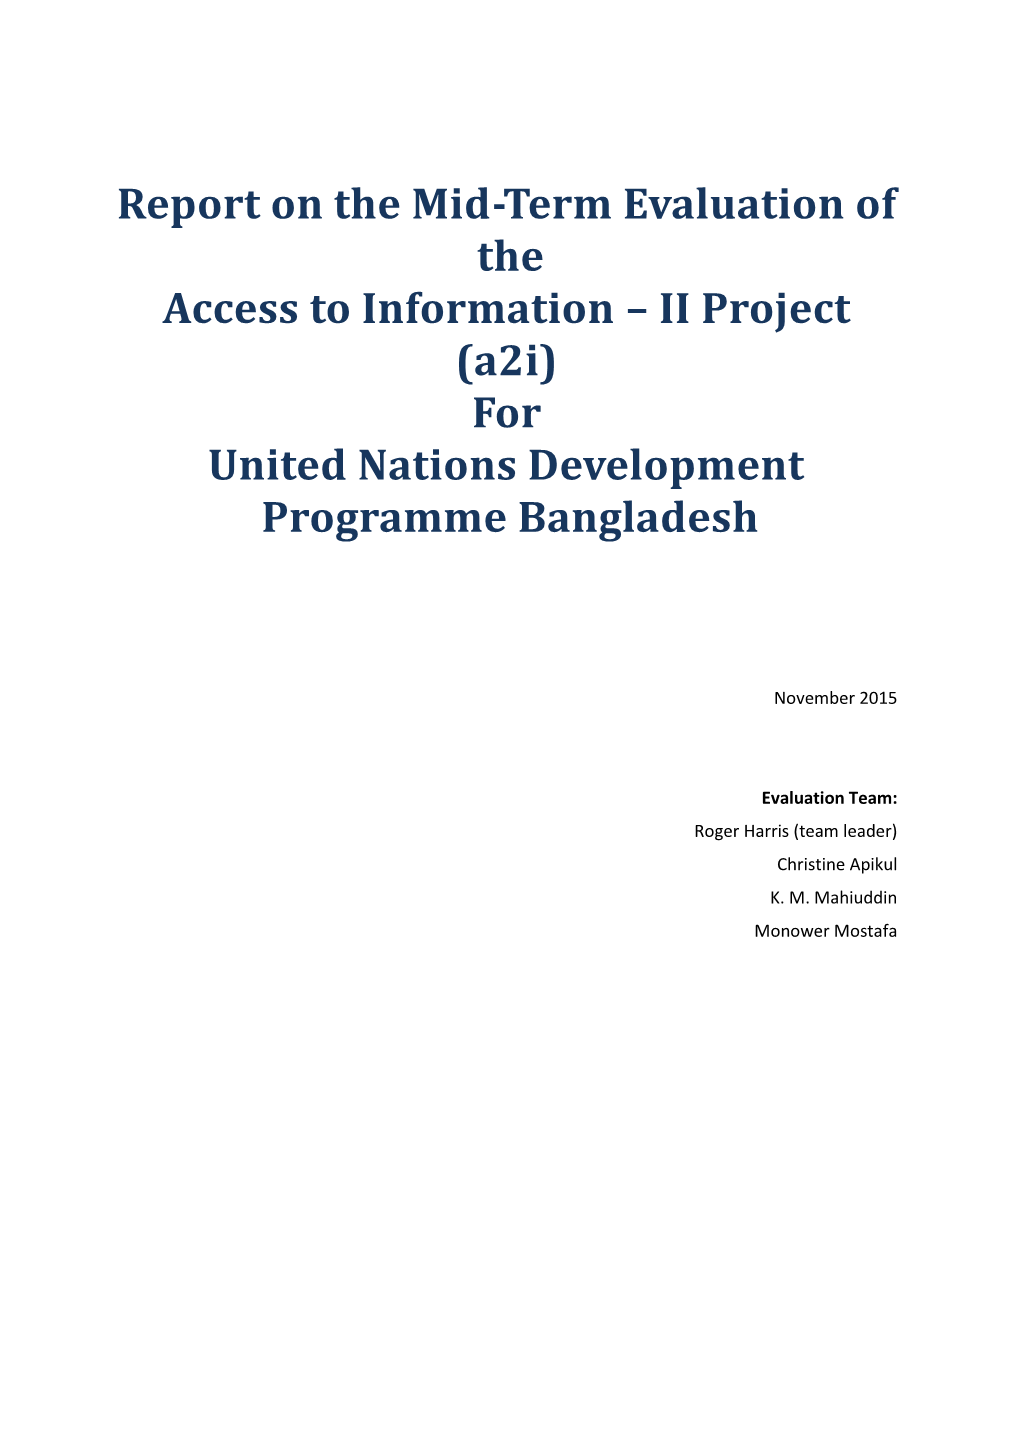 Report on the Mid-Term Evaluation of the Access to Information – II Project (A2i) for United Nations Development Programme Bangladesh